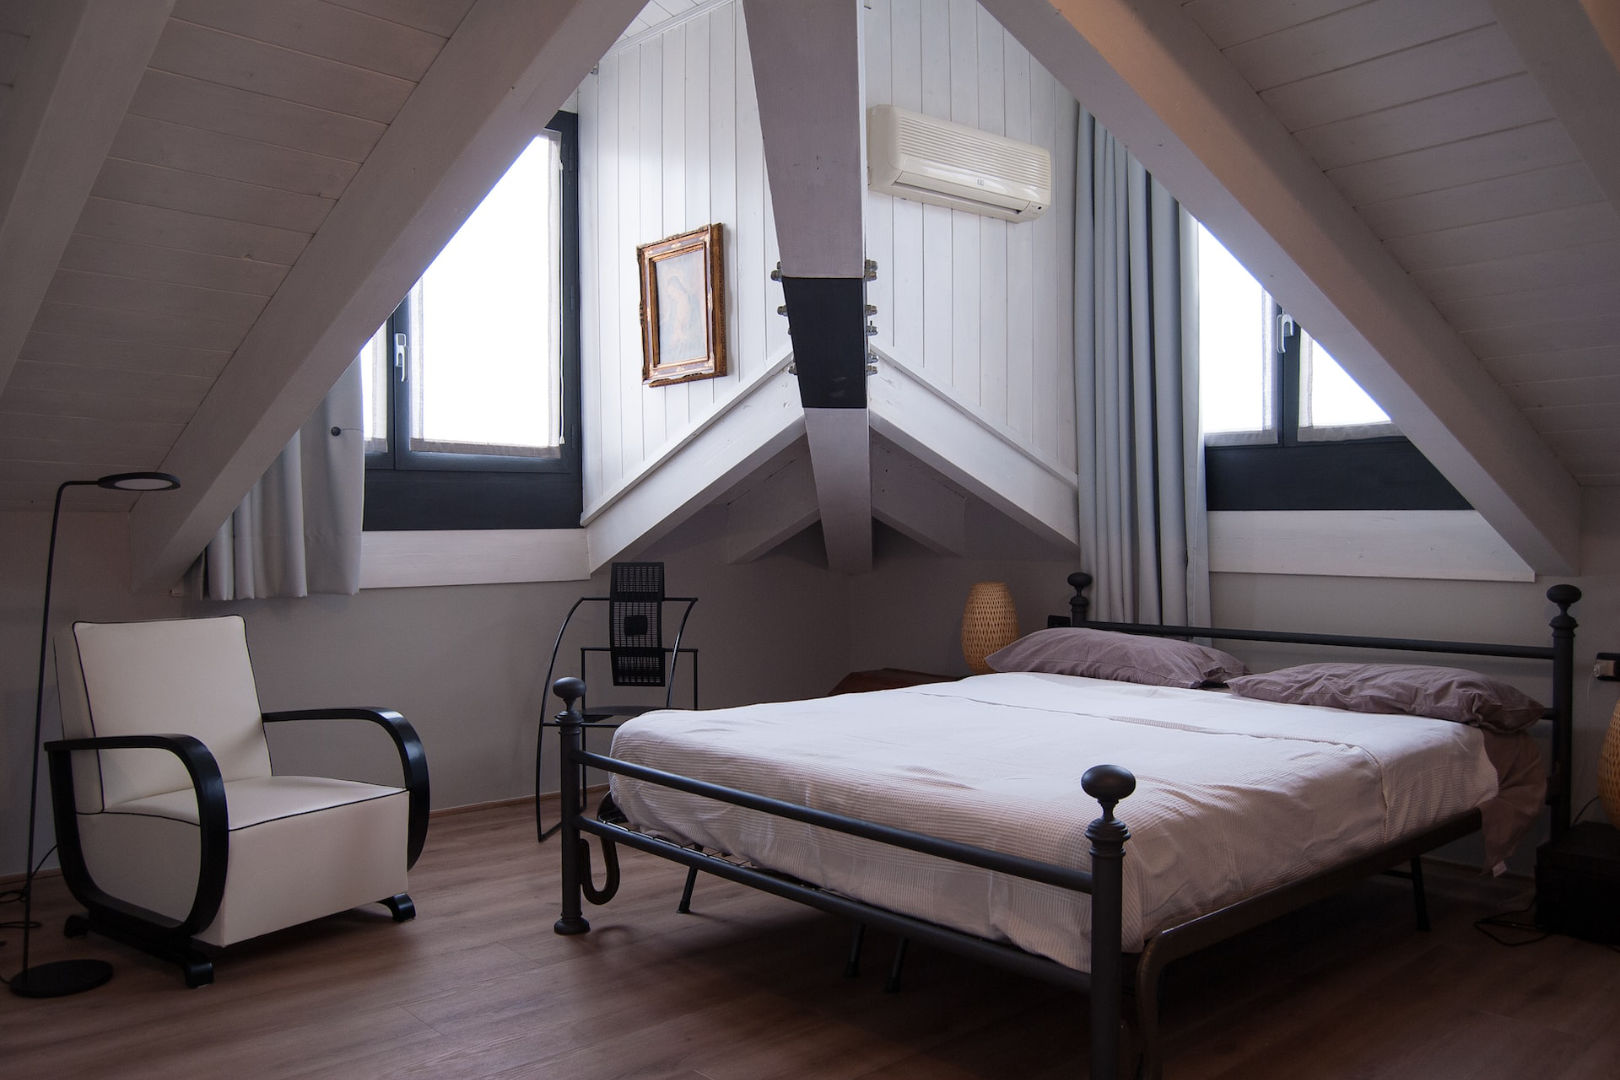 An attic bedroom with a black steel bed frame near a window.